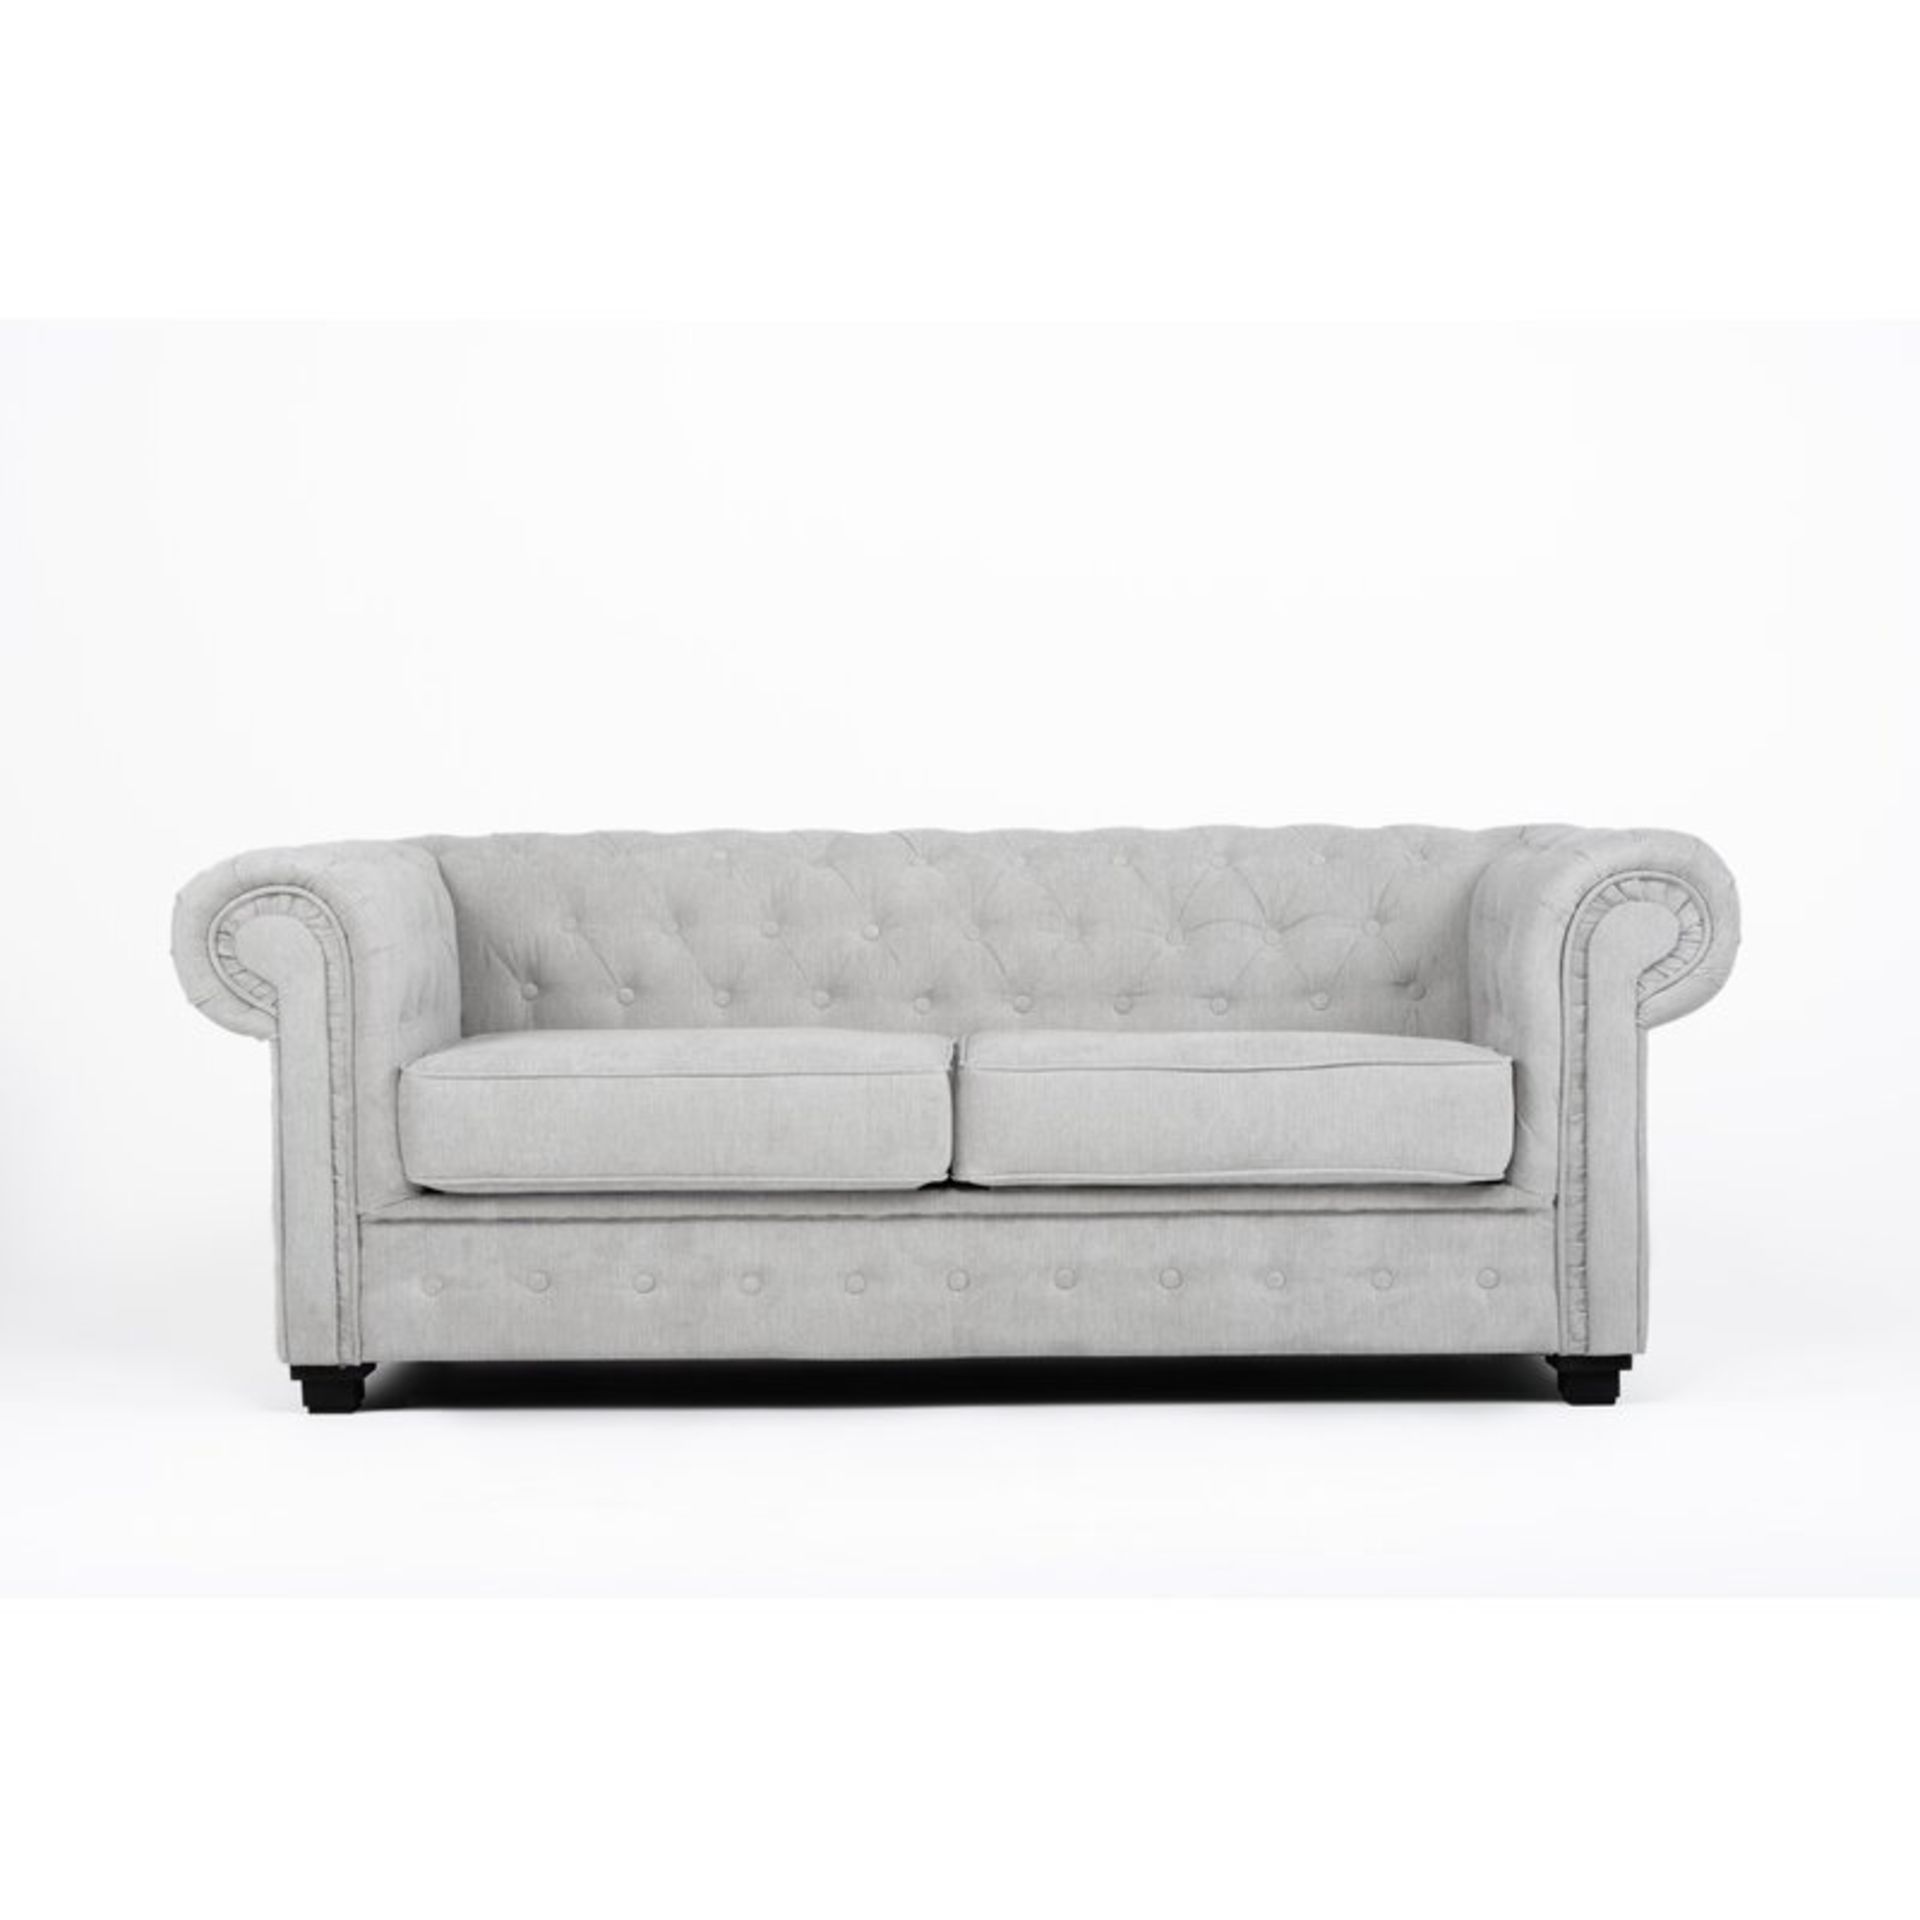 Alderwood 3 Seater Sofa Bed - RRP £769.99. COLLECTION OR LOCAL DELIVERY ONLY FOR £10 - Image 2 of 5